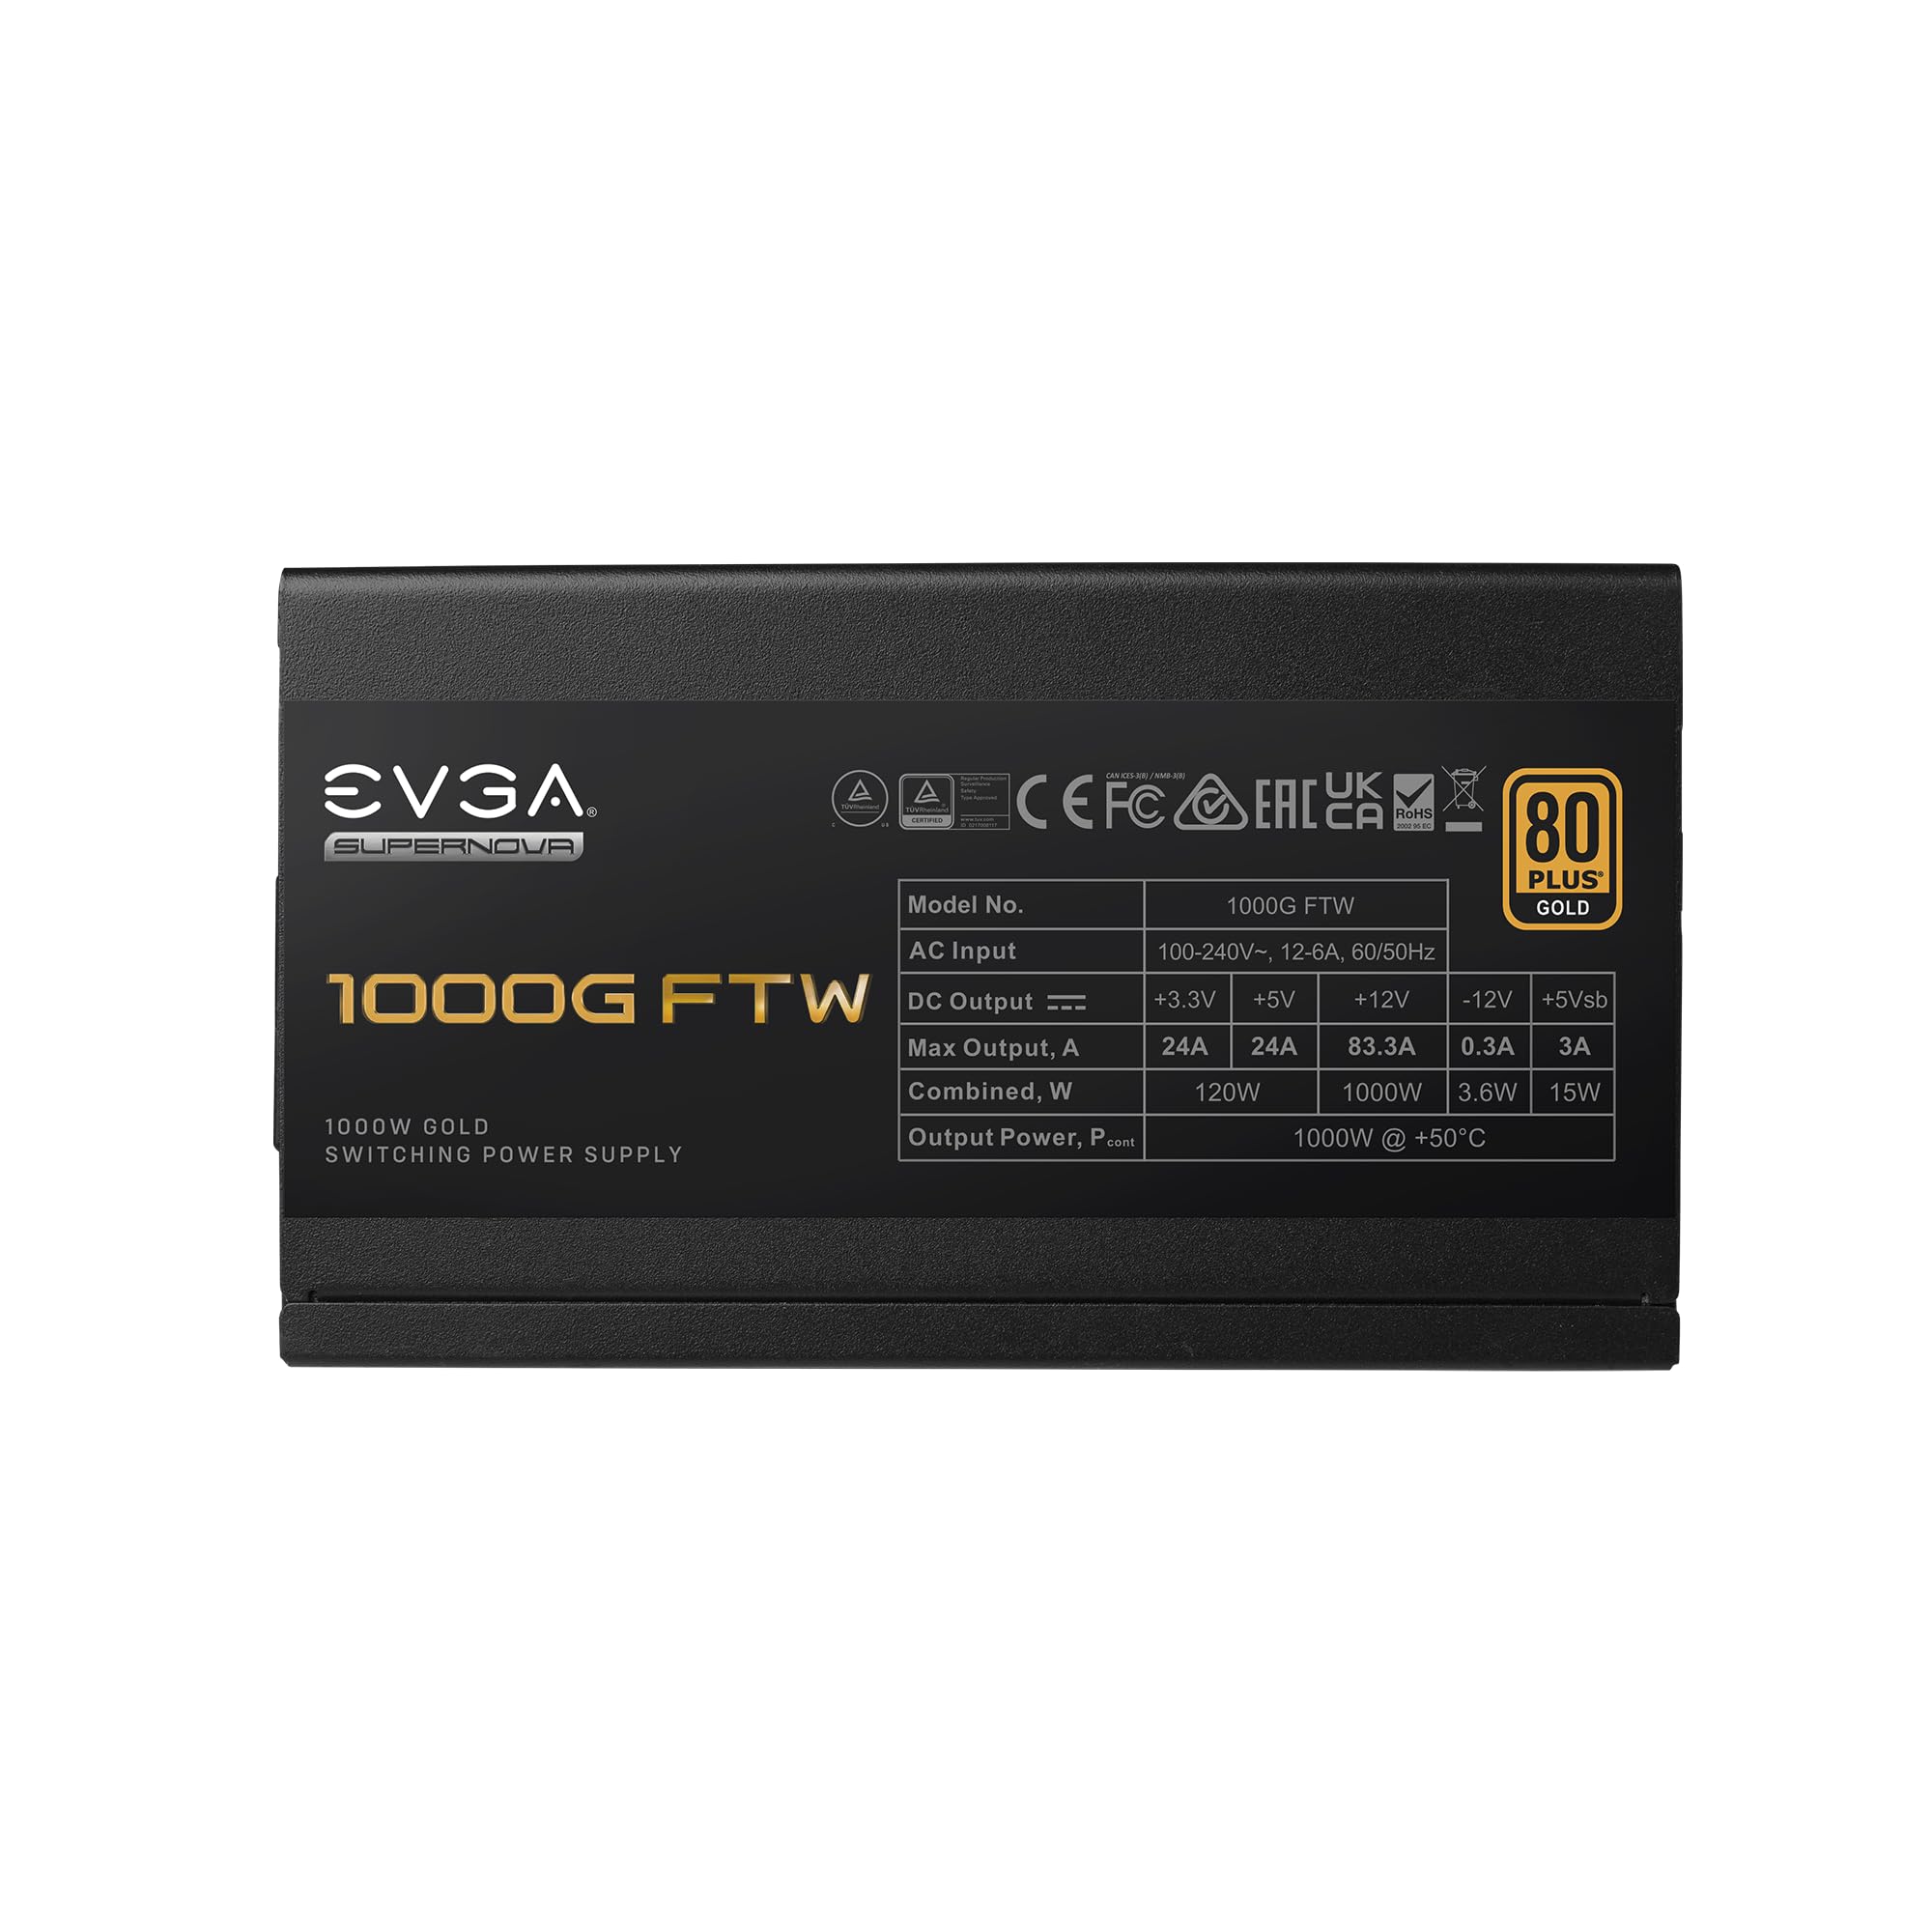 EVGA Supernova 1000G FTW, 80 Plus Gold 1000W, Fully Modular, 3 Year Warranty, Includes Power ON Self Tester, Compact 150mm Size, Power Supply 535-5G-1000-K1